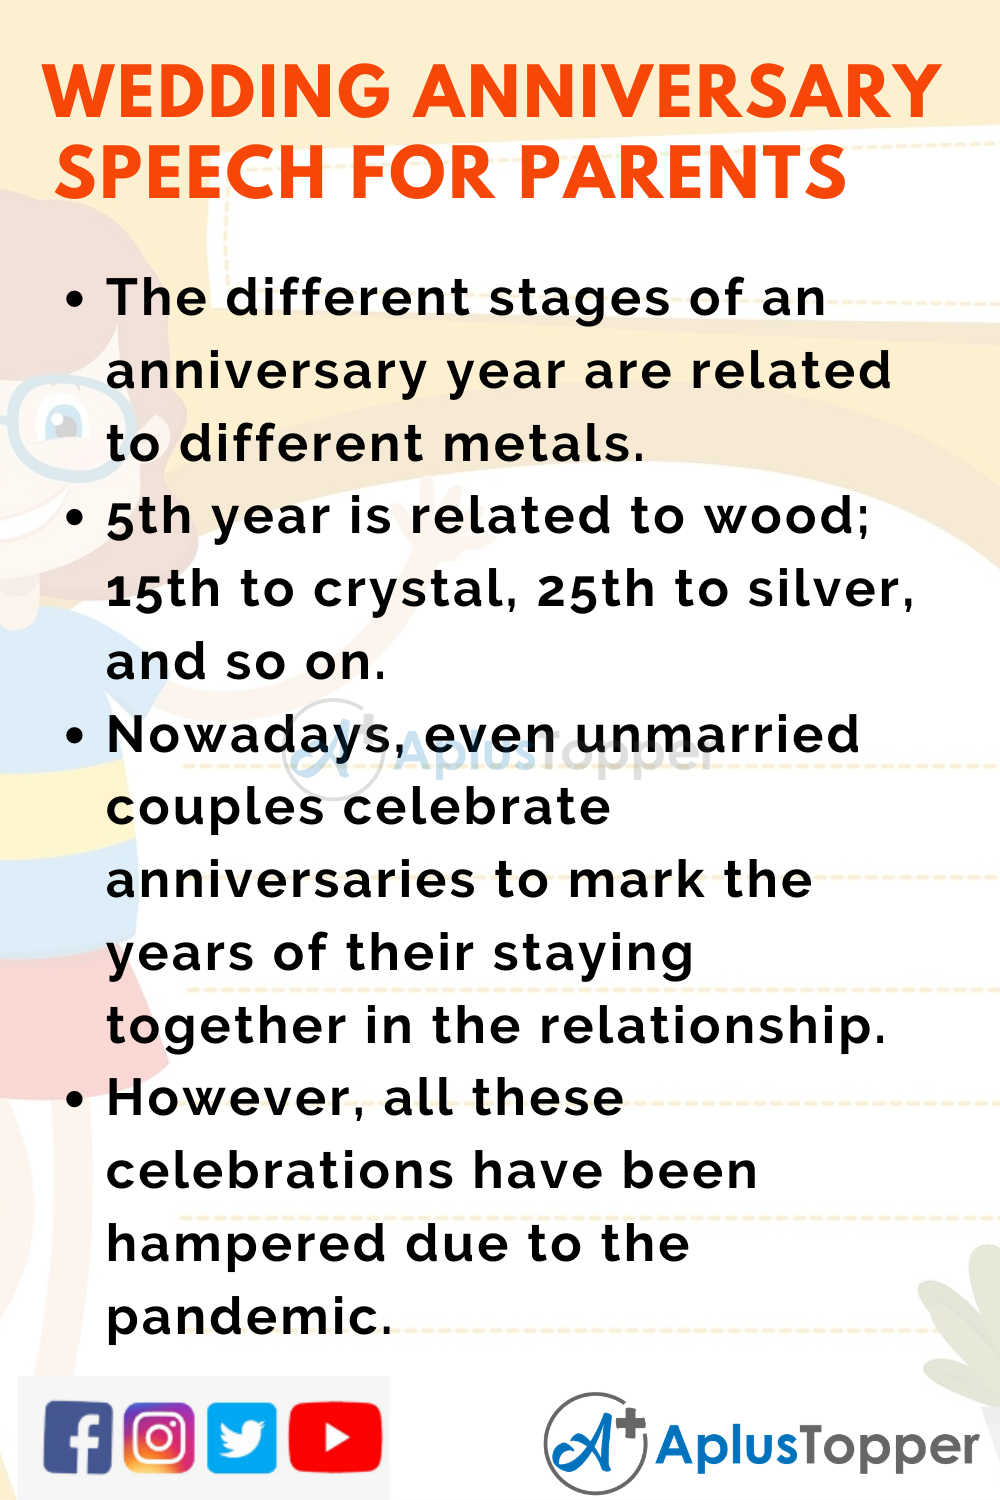 Wedding Anniversary Speech for Parents in English for Students and Children  - A Plus Topper